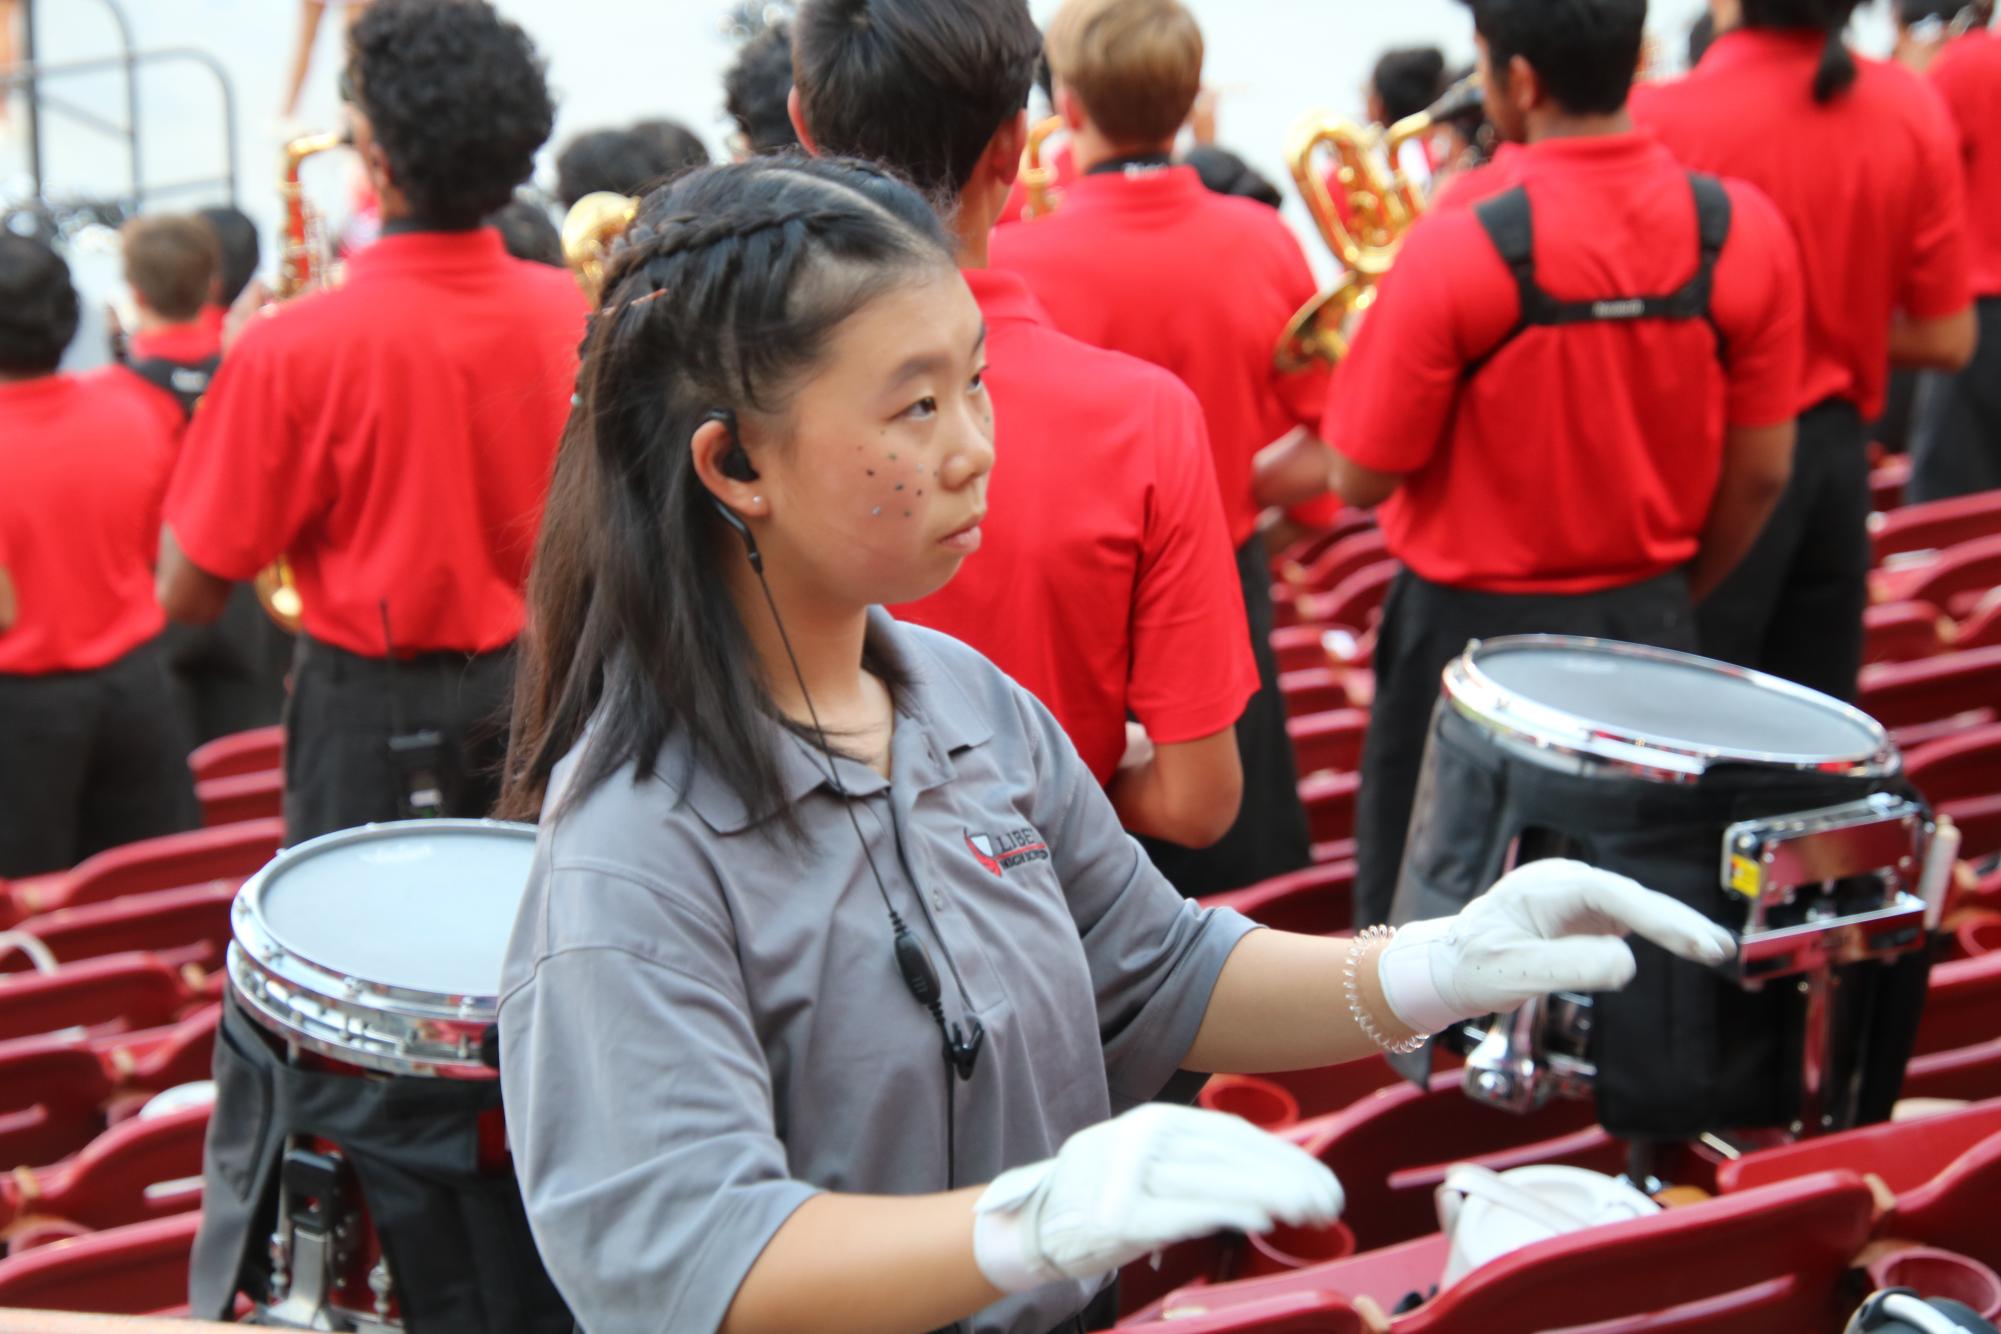 Band will be taking a break from football and will be taking on the field for Tuesday’s Annual Frisco ISD Marching Band Showcase at the Ford Center from 6:30-9:30 p.m. The showcase of this years show, A Common Thread, will be an opportunity for the band to display their talent in front of the districts 11 other schools.
